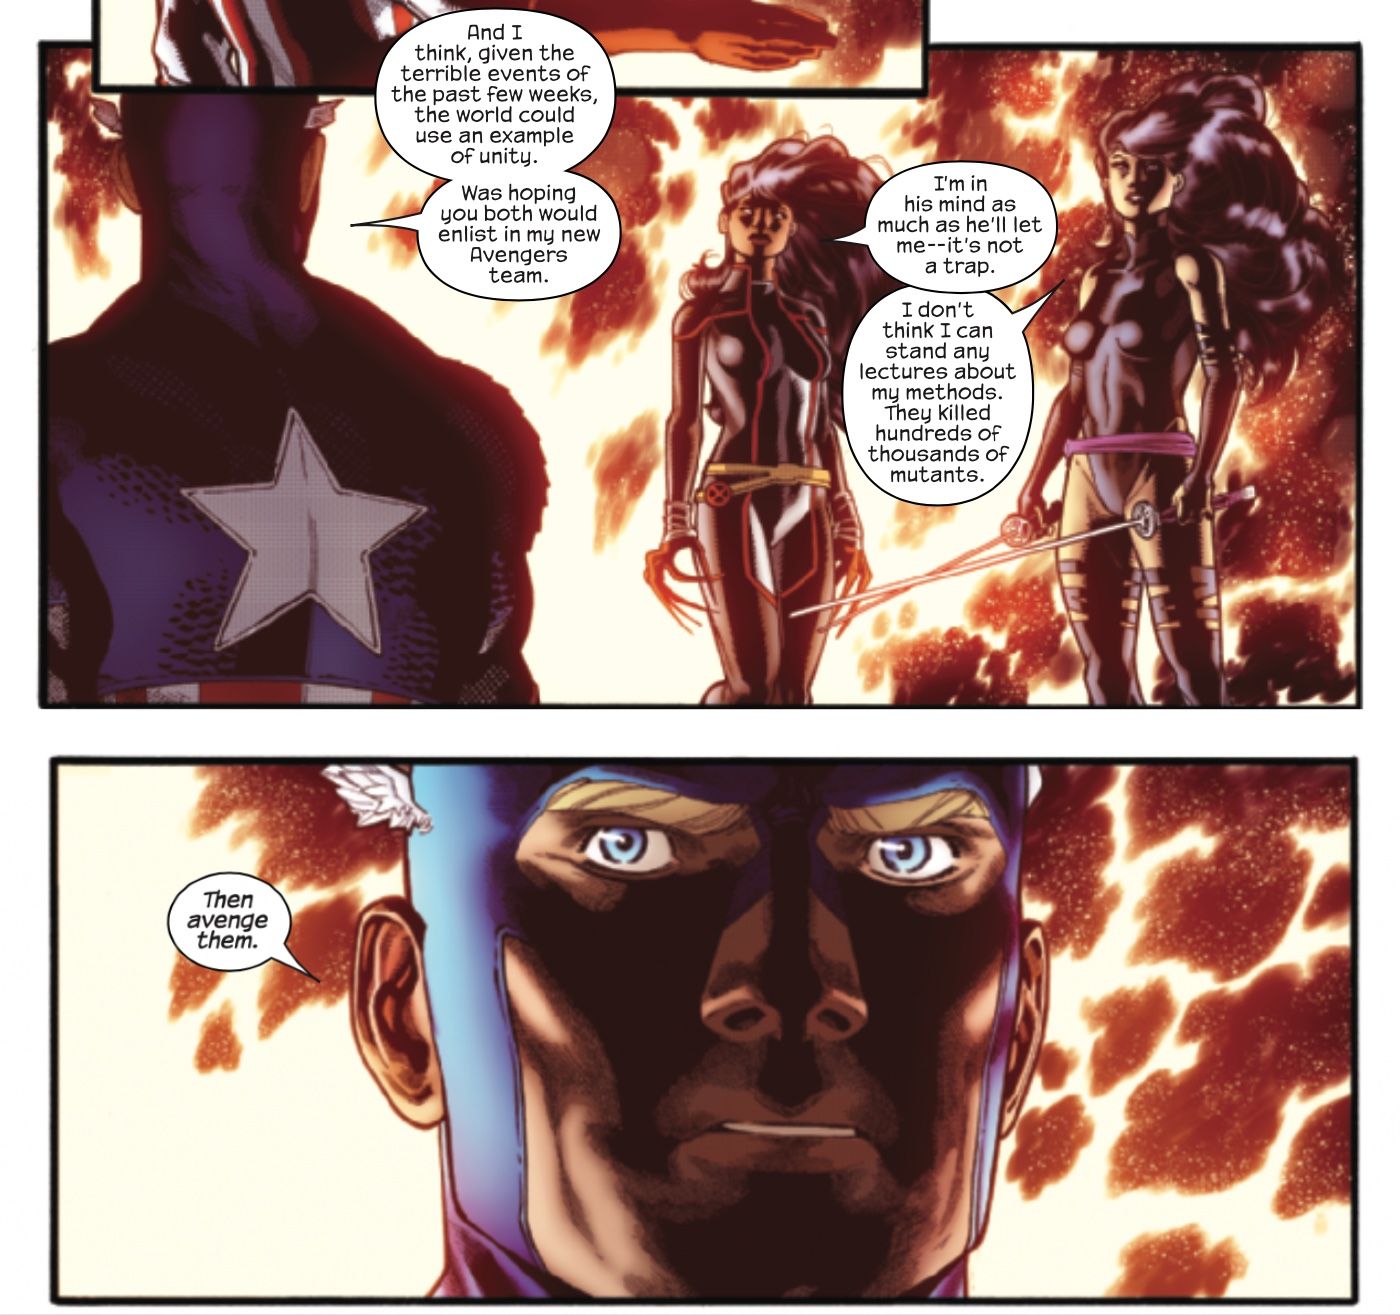 “Avenge Them”: Captain America’s Reaction to the Fall of X Changes Him Forever